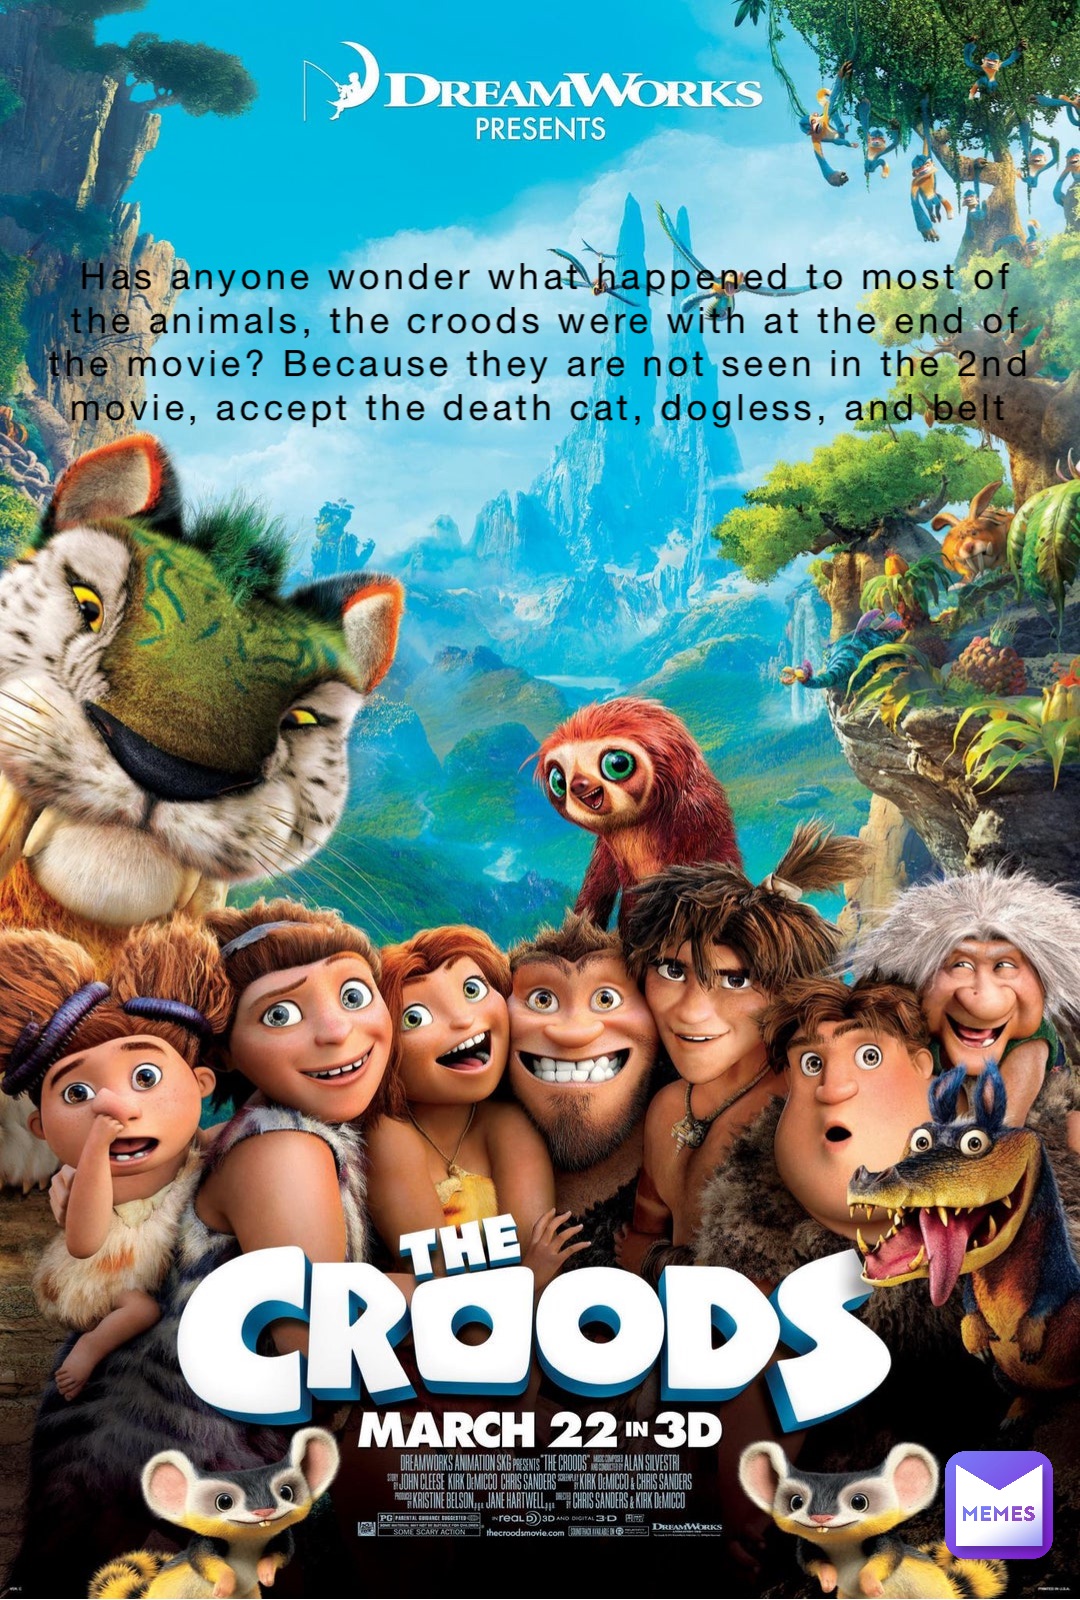 Has anyone wonder what happened to most of the animals, the croods were with at the end of the movie? Because they are not seen in the 2nd movie, accept the death cat, dogless, and belt